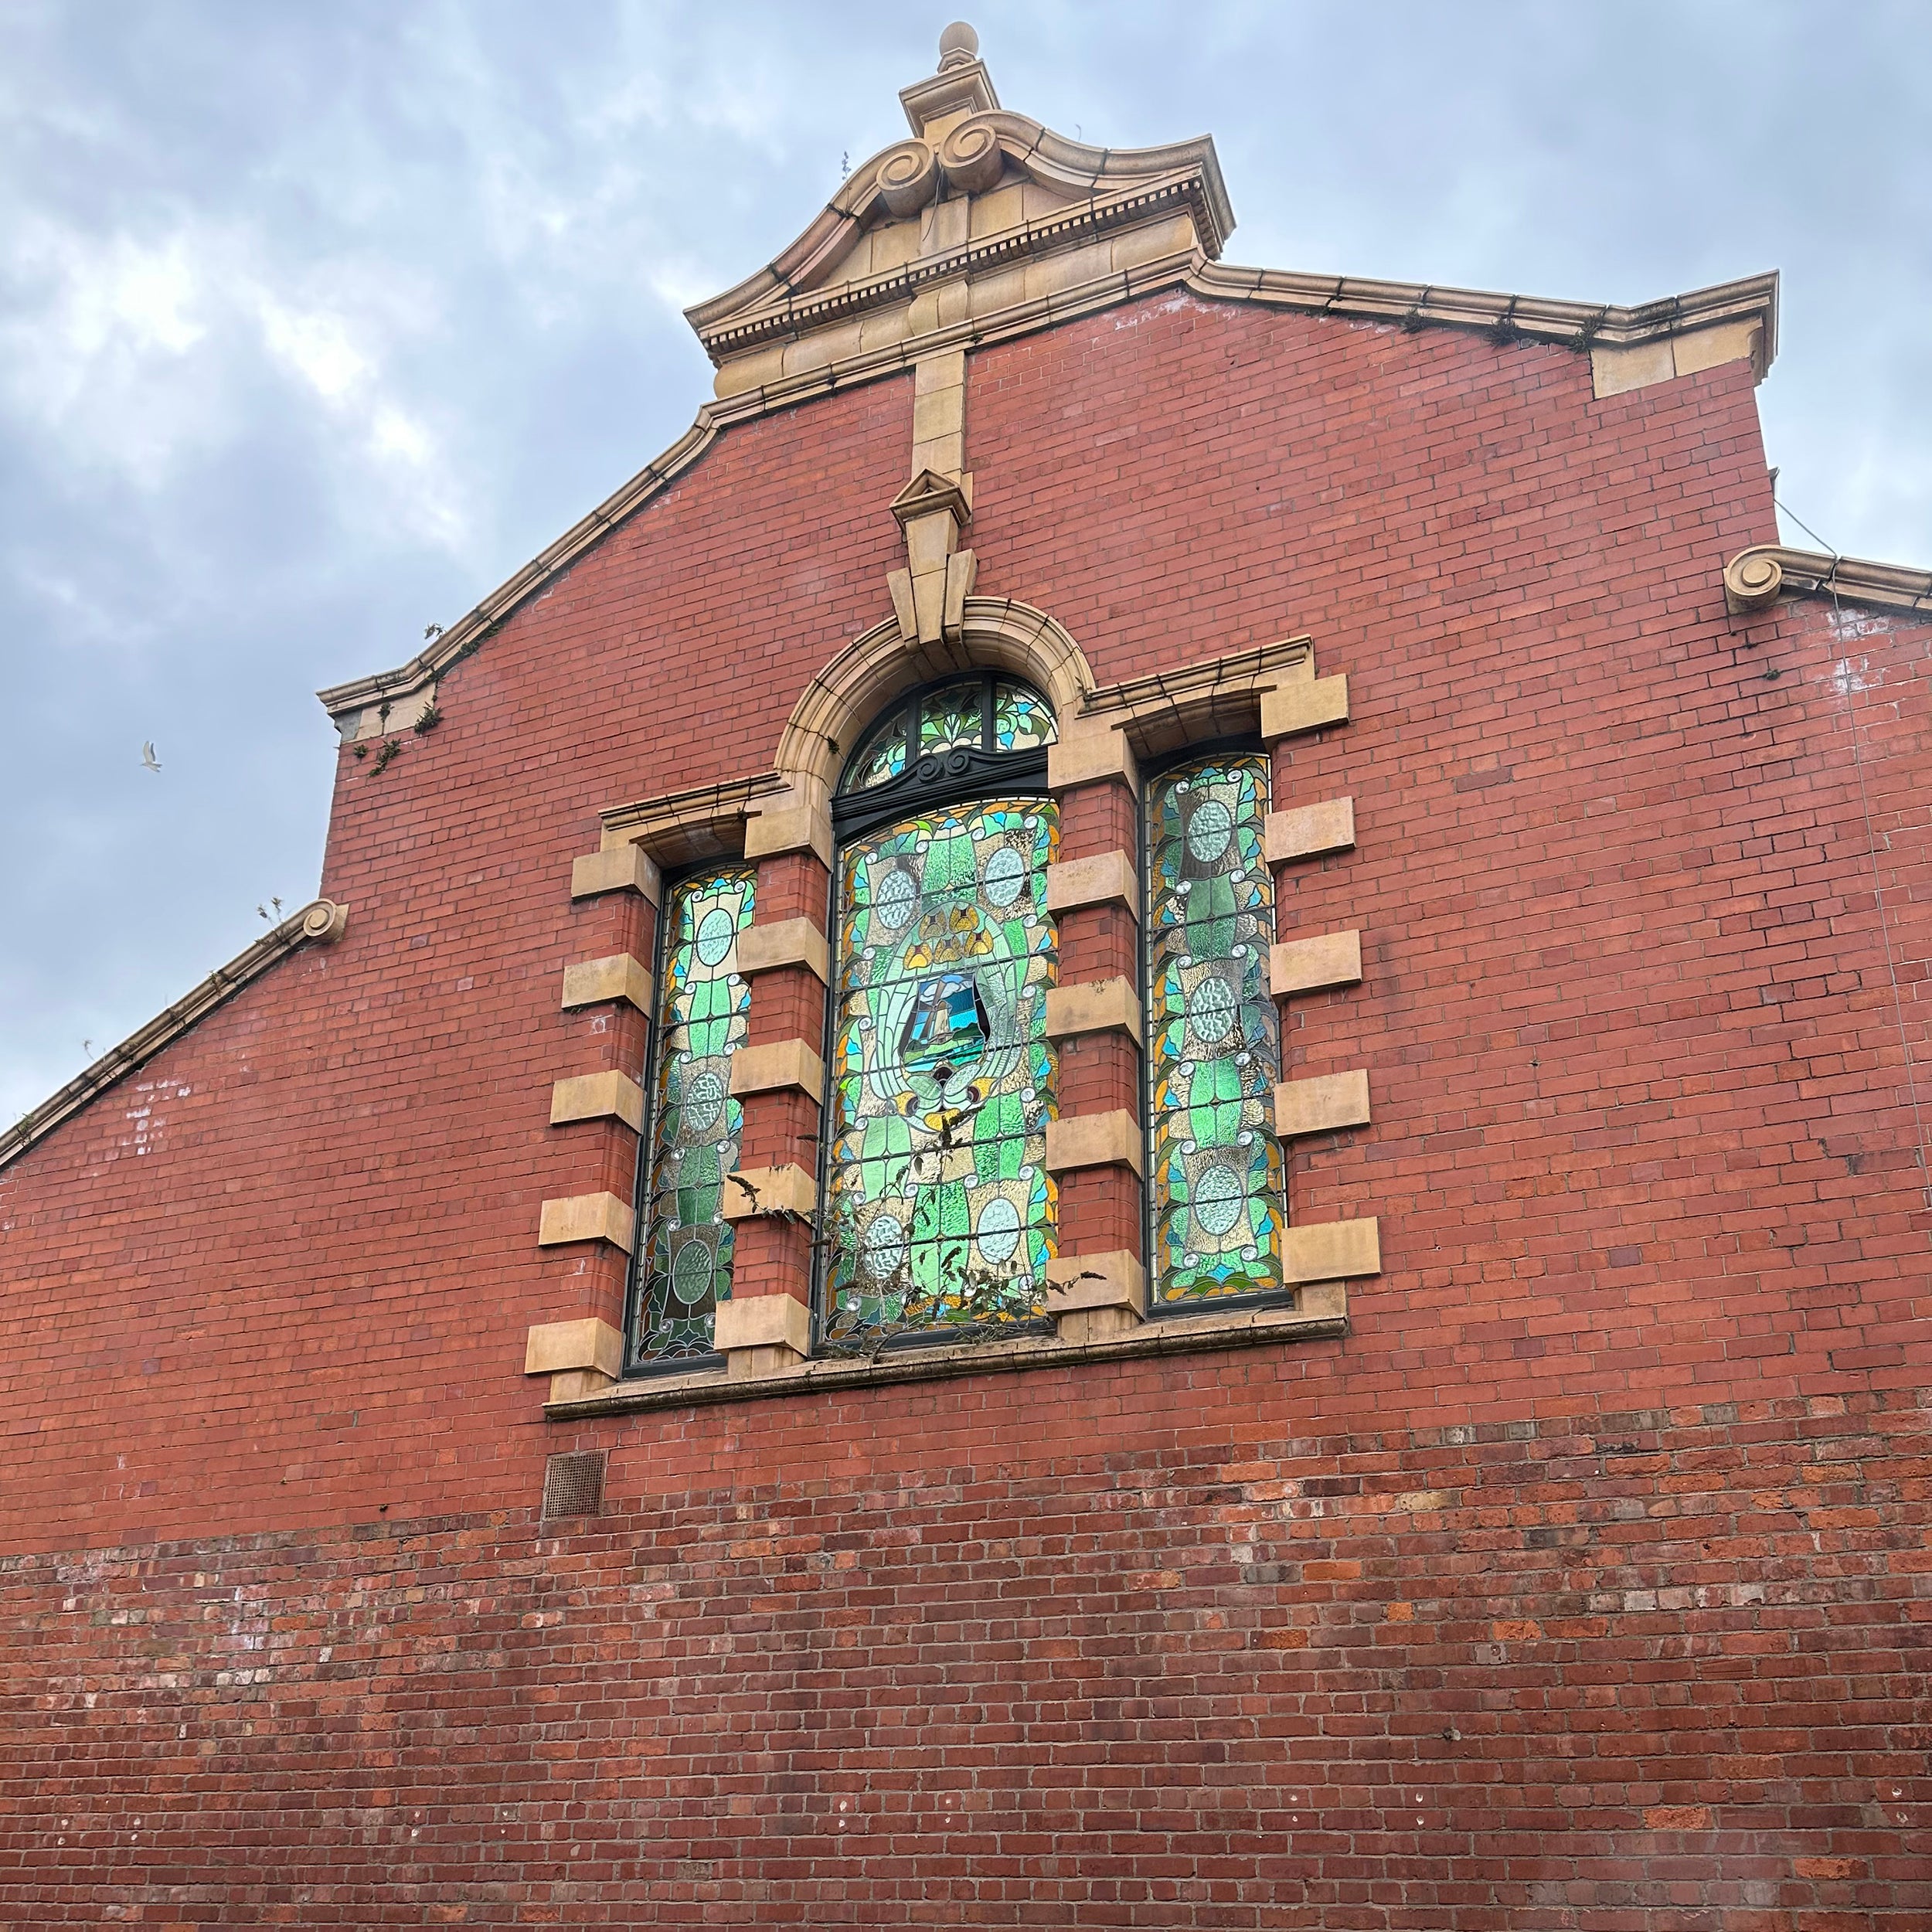 A stained glass window in the red bricked building from the outside